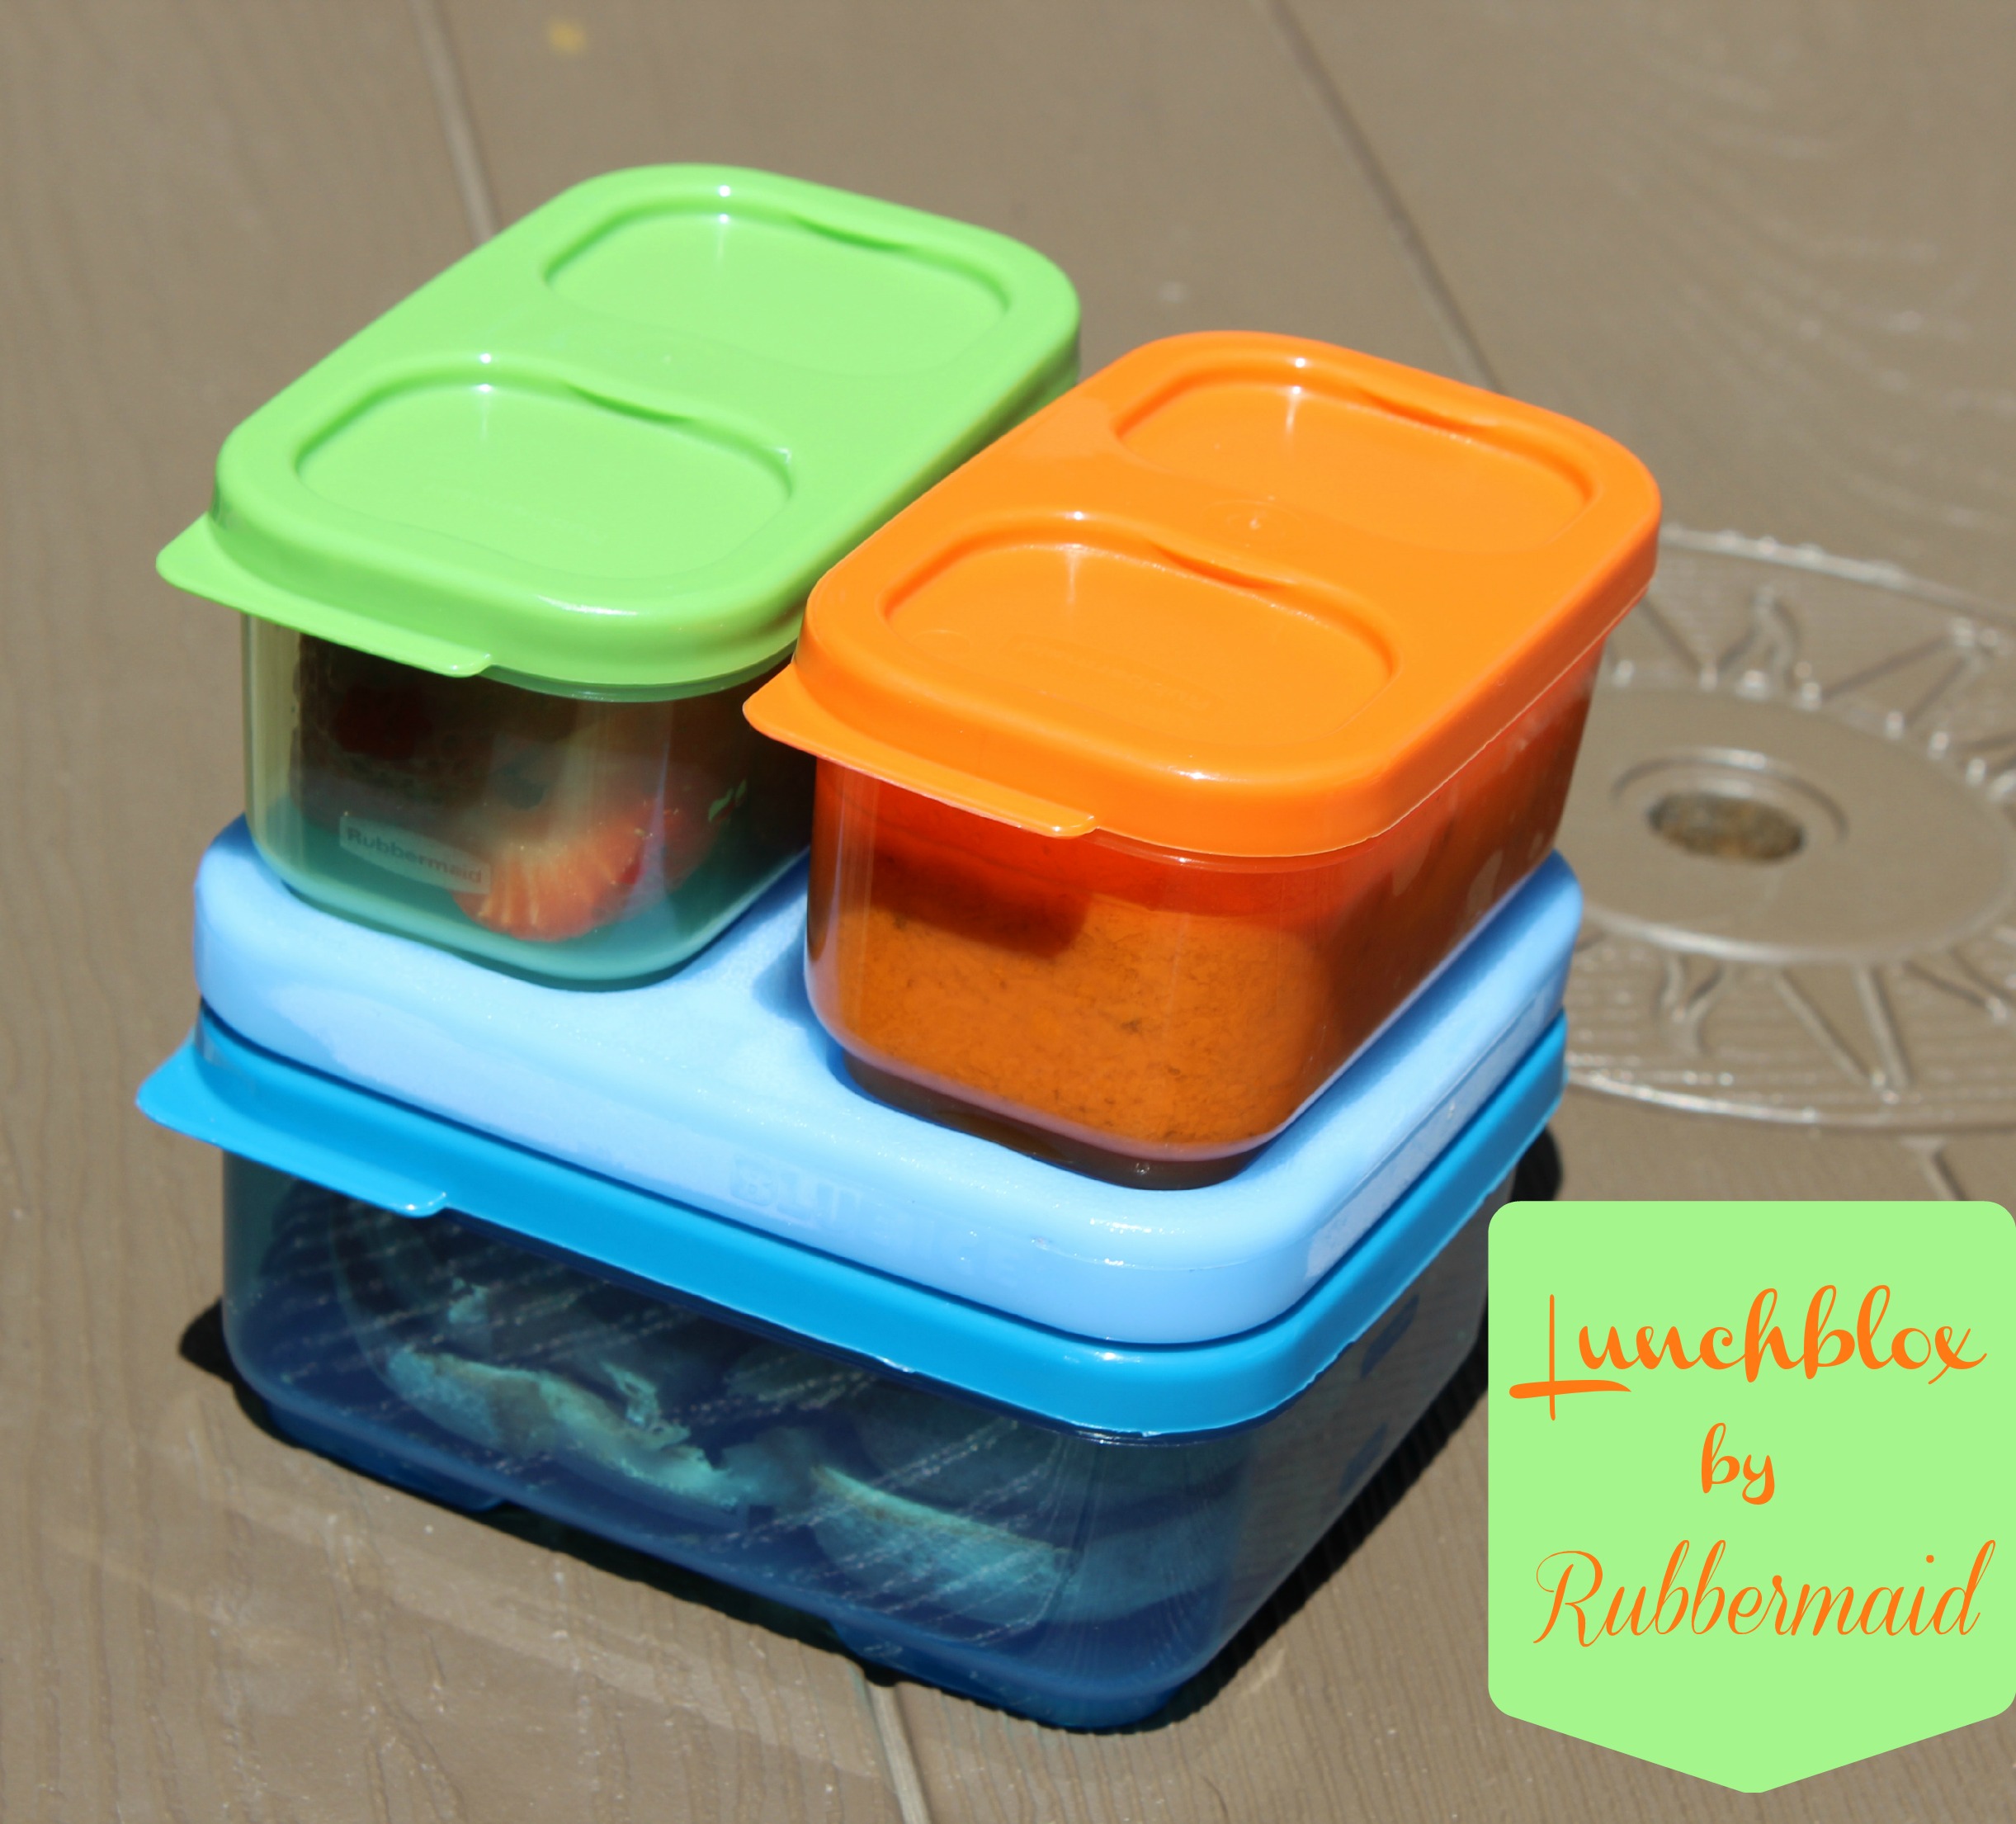 Rubbermaid Lunchblox Containers - Mom vs the Boys